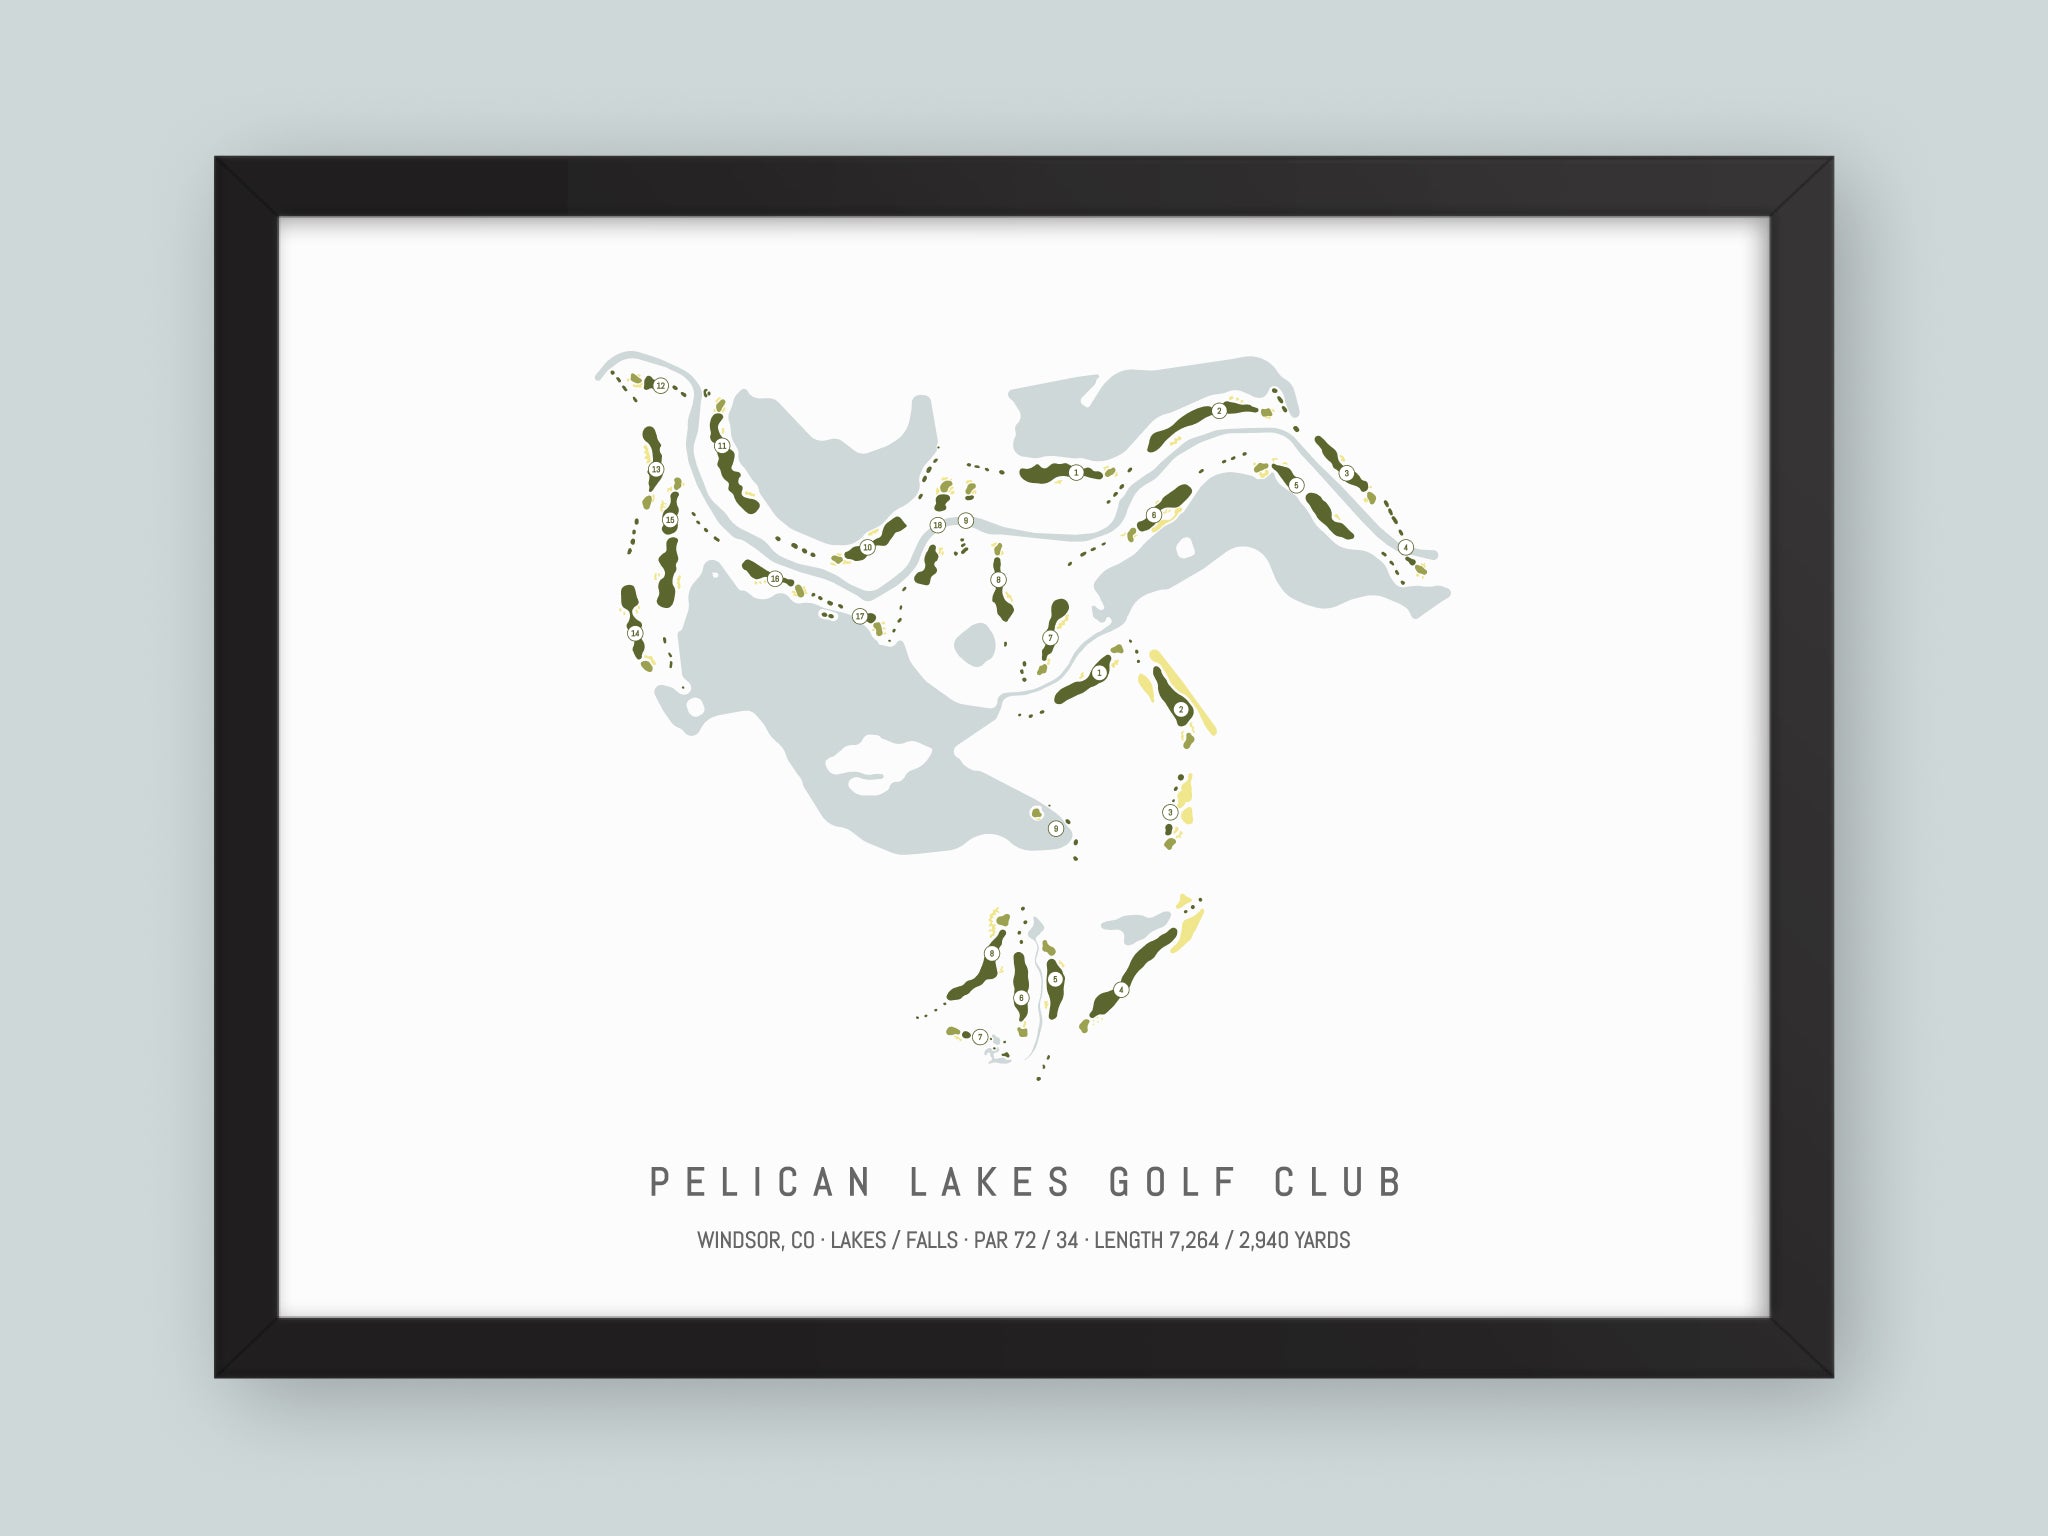 Pelican-Lakes-Golf-Club-CO--Black-Frame-24x18-With-Hole-Numbers